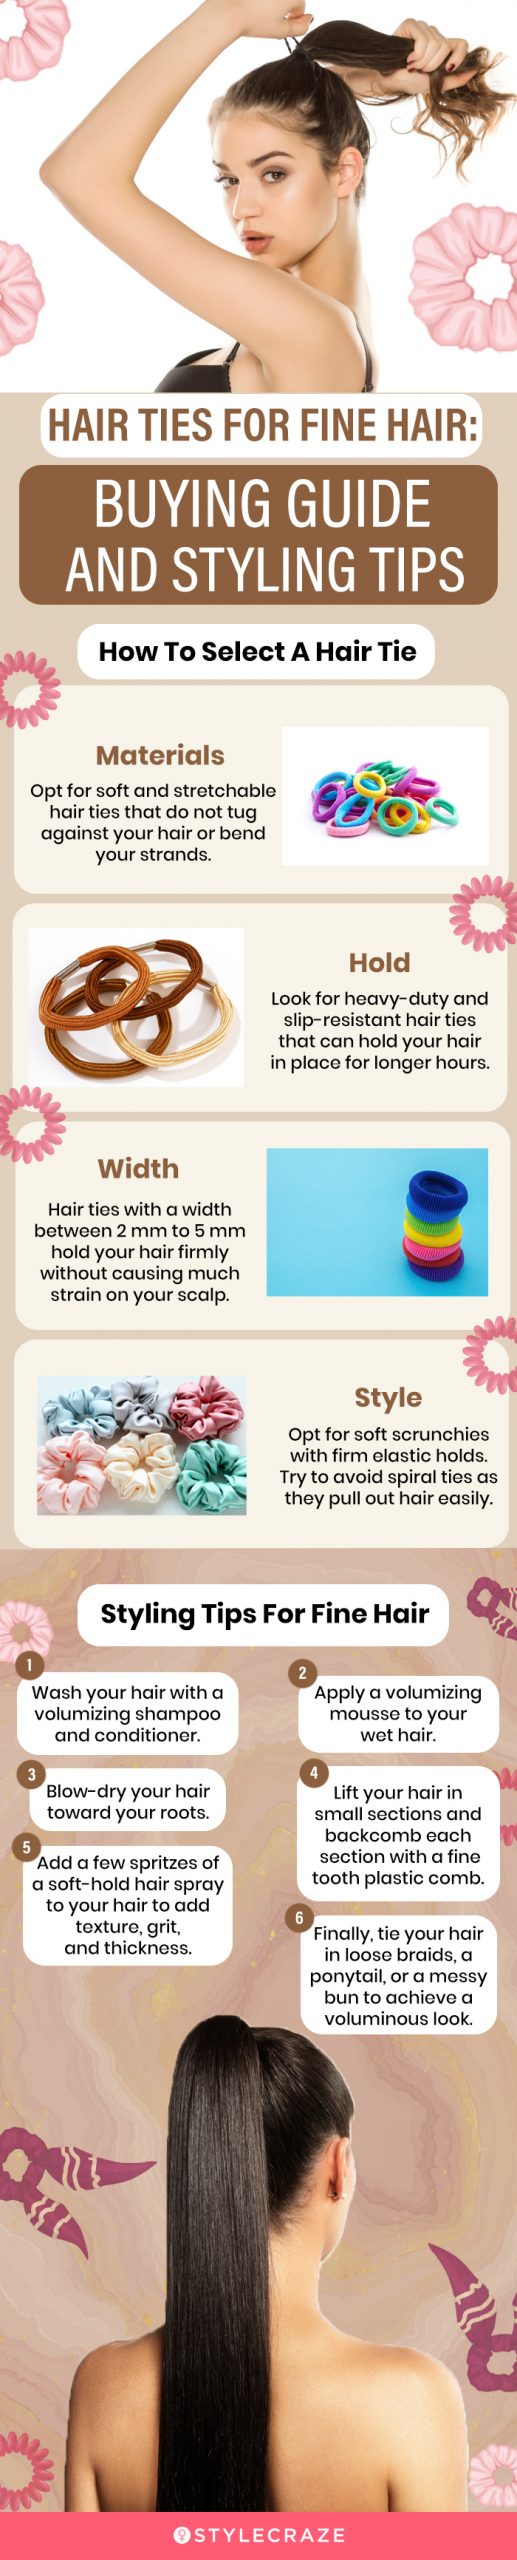 Hair Tie For Fine Hair: Buying Guide (infographic)